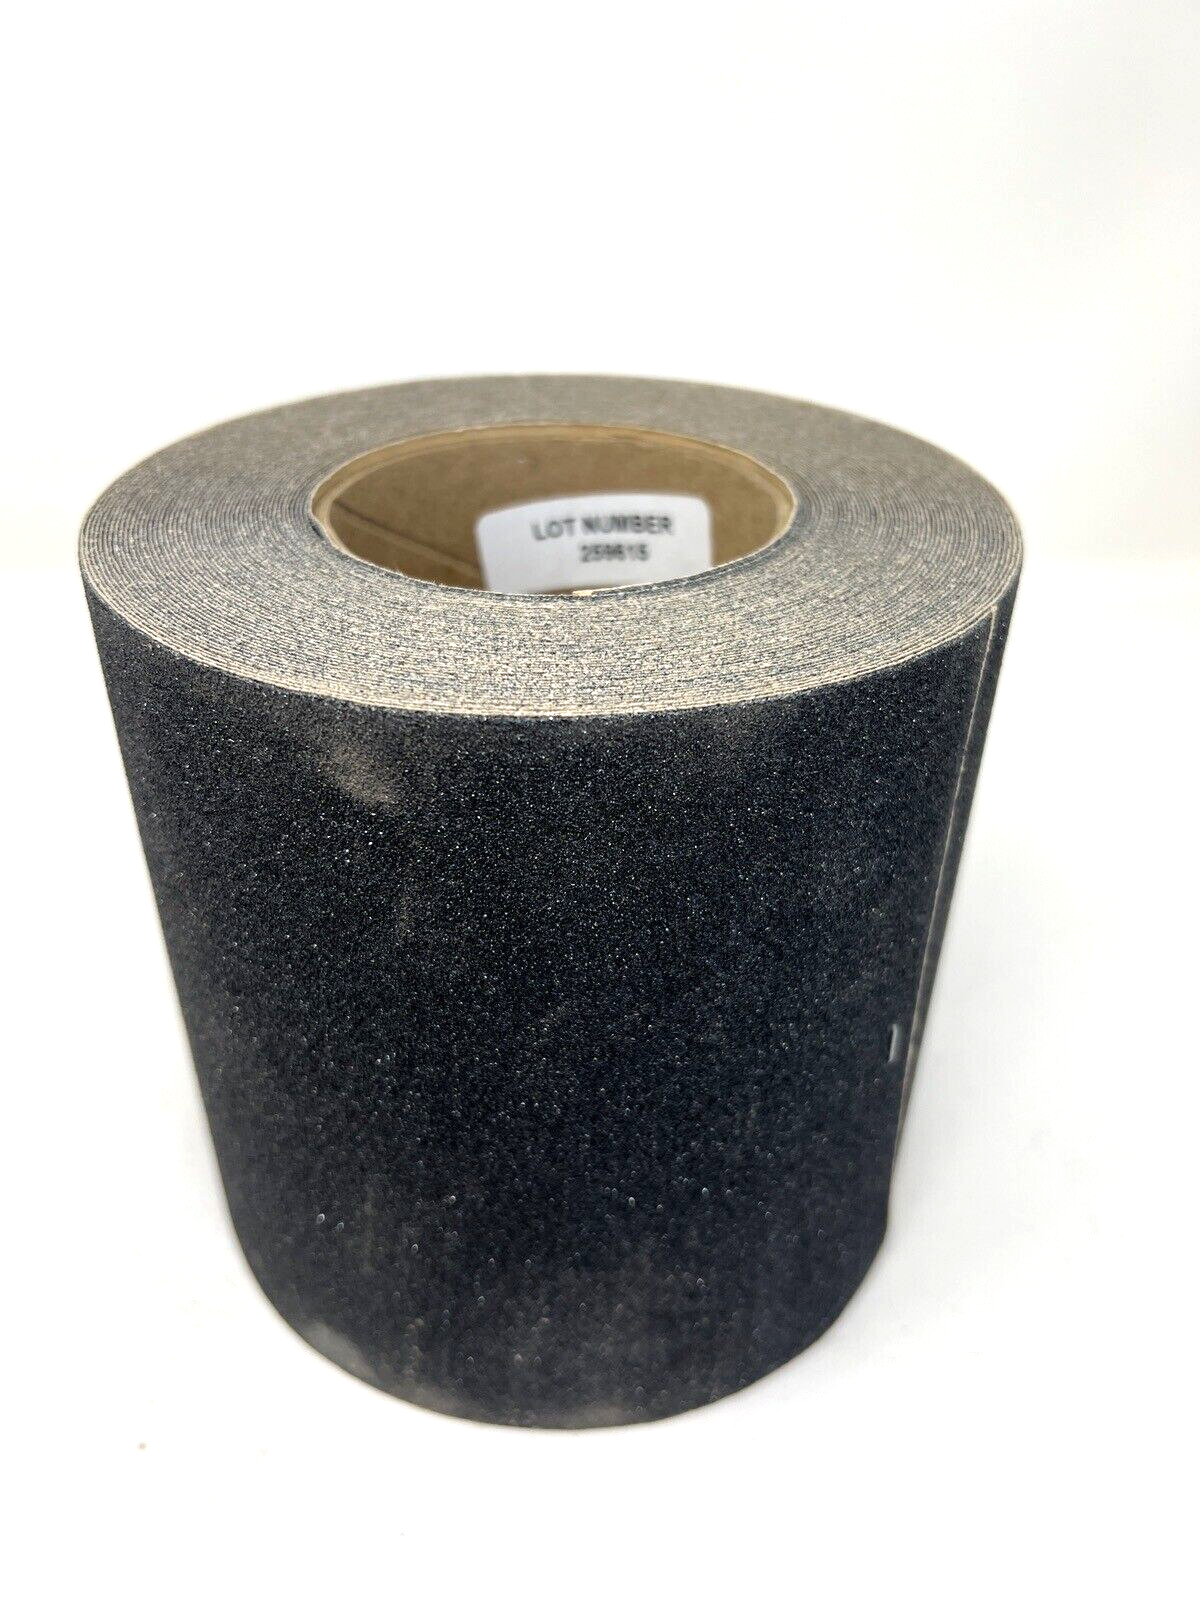 SPECIAL OFFER - 60% Off - Amazon Return - Never Used / Installed - 6" X 60' Roll BLACK Abrasive 80 Grit Tape